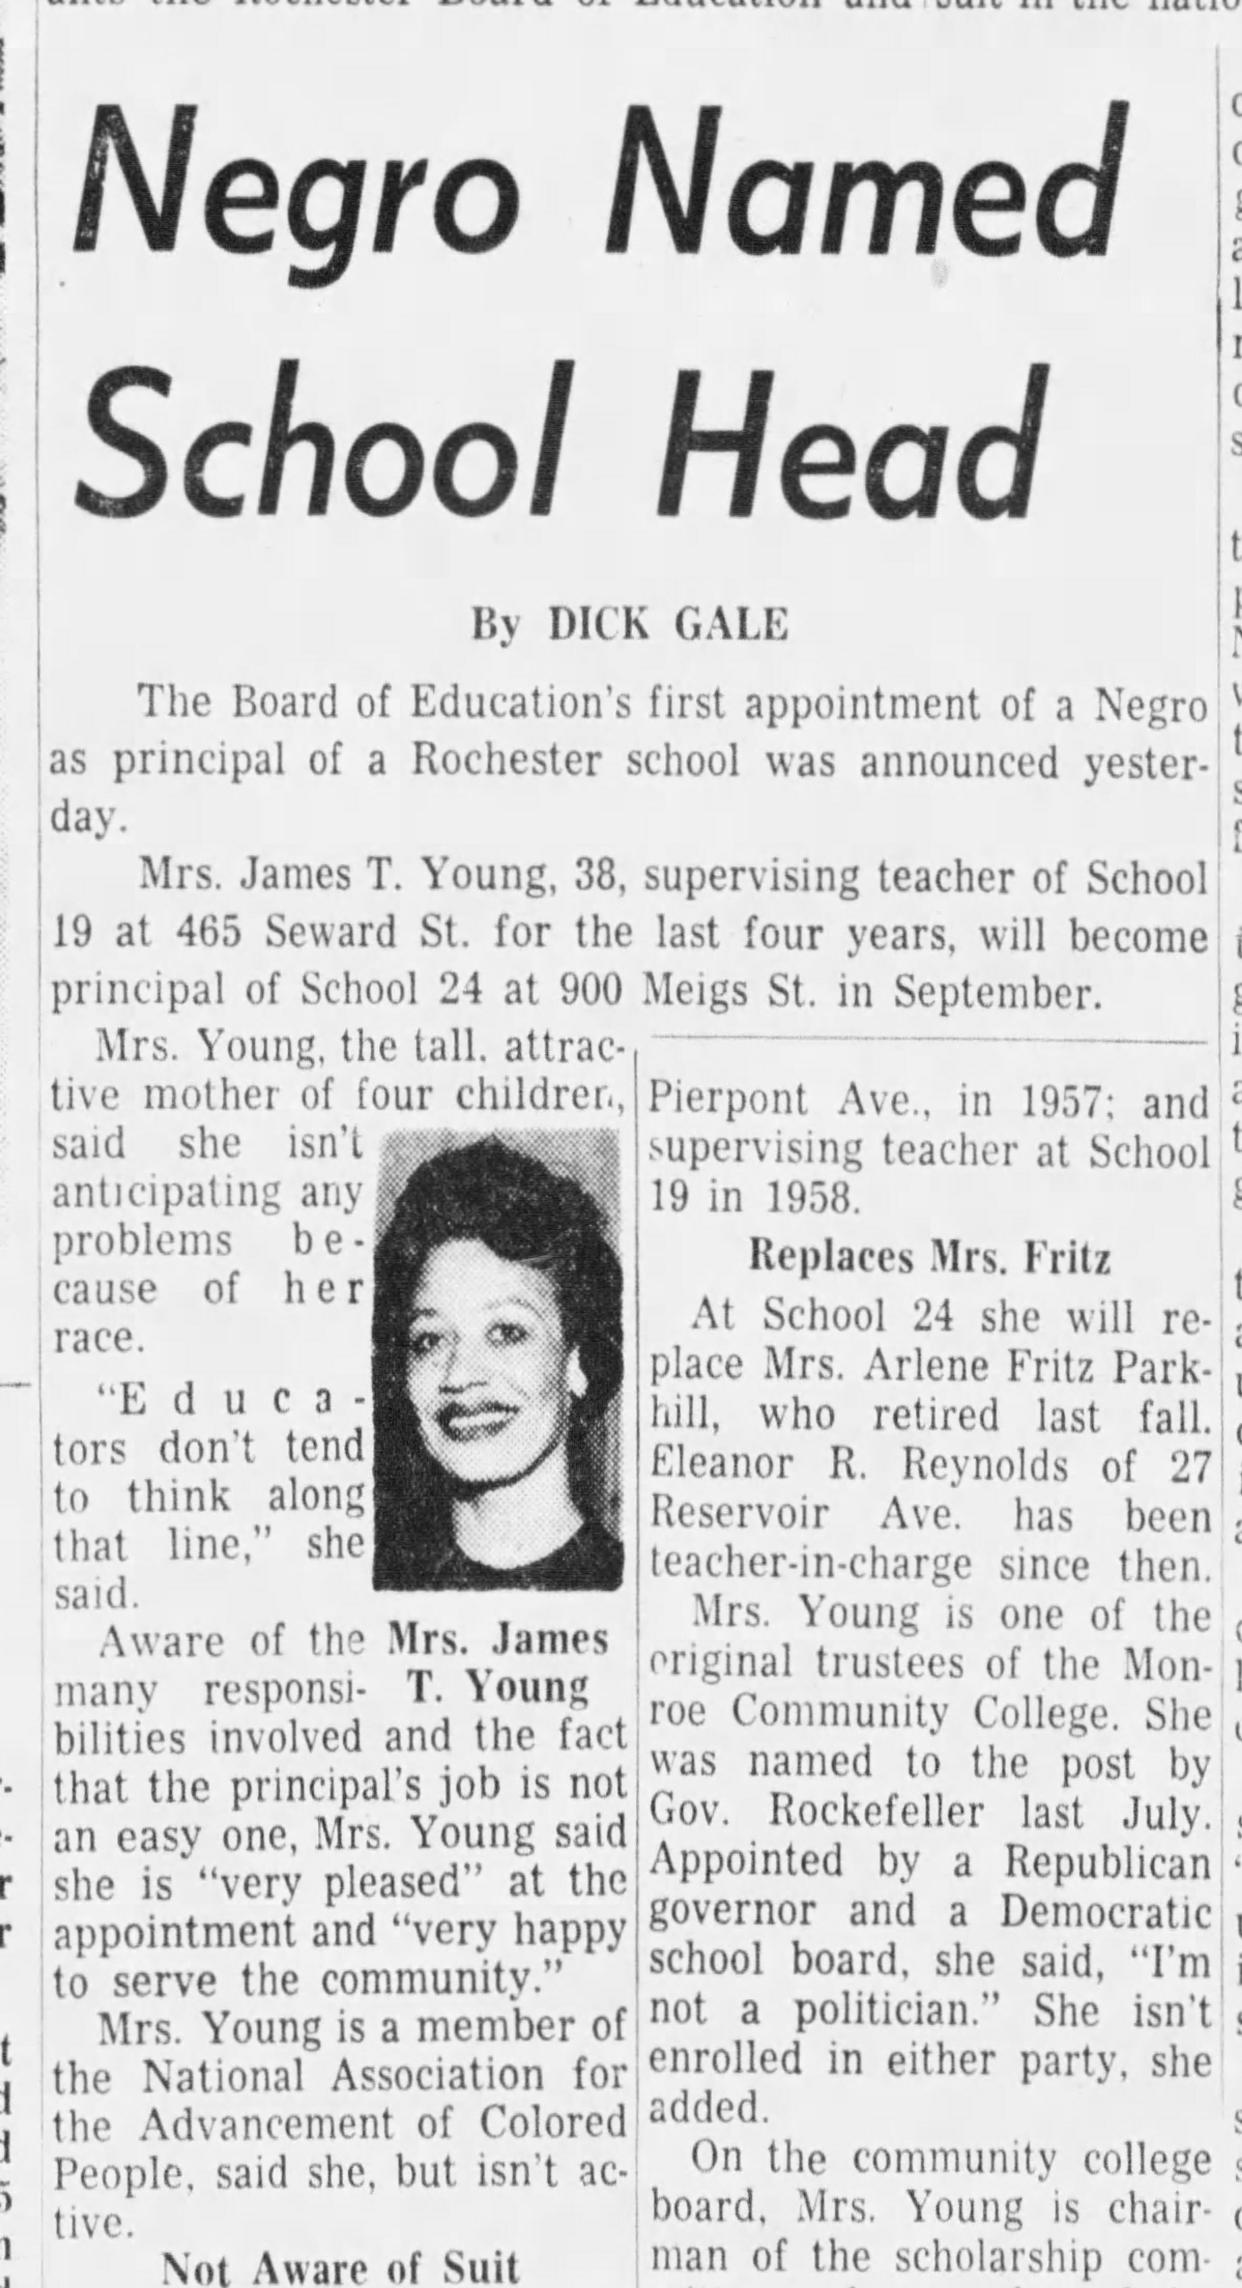 The May 29, 1962 Democrat and Chronicle announcing Alice Young's selection as principal of School 24.